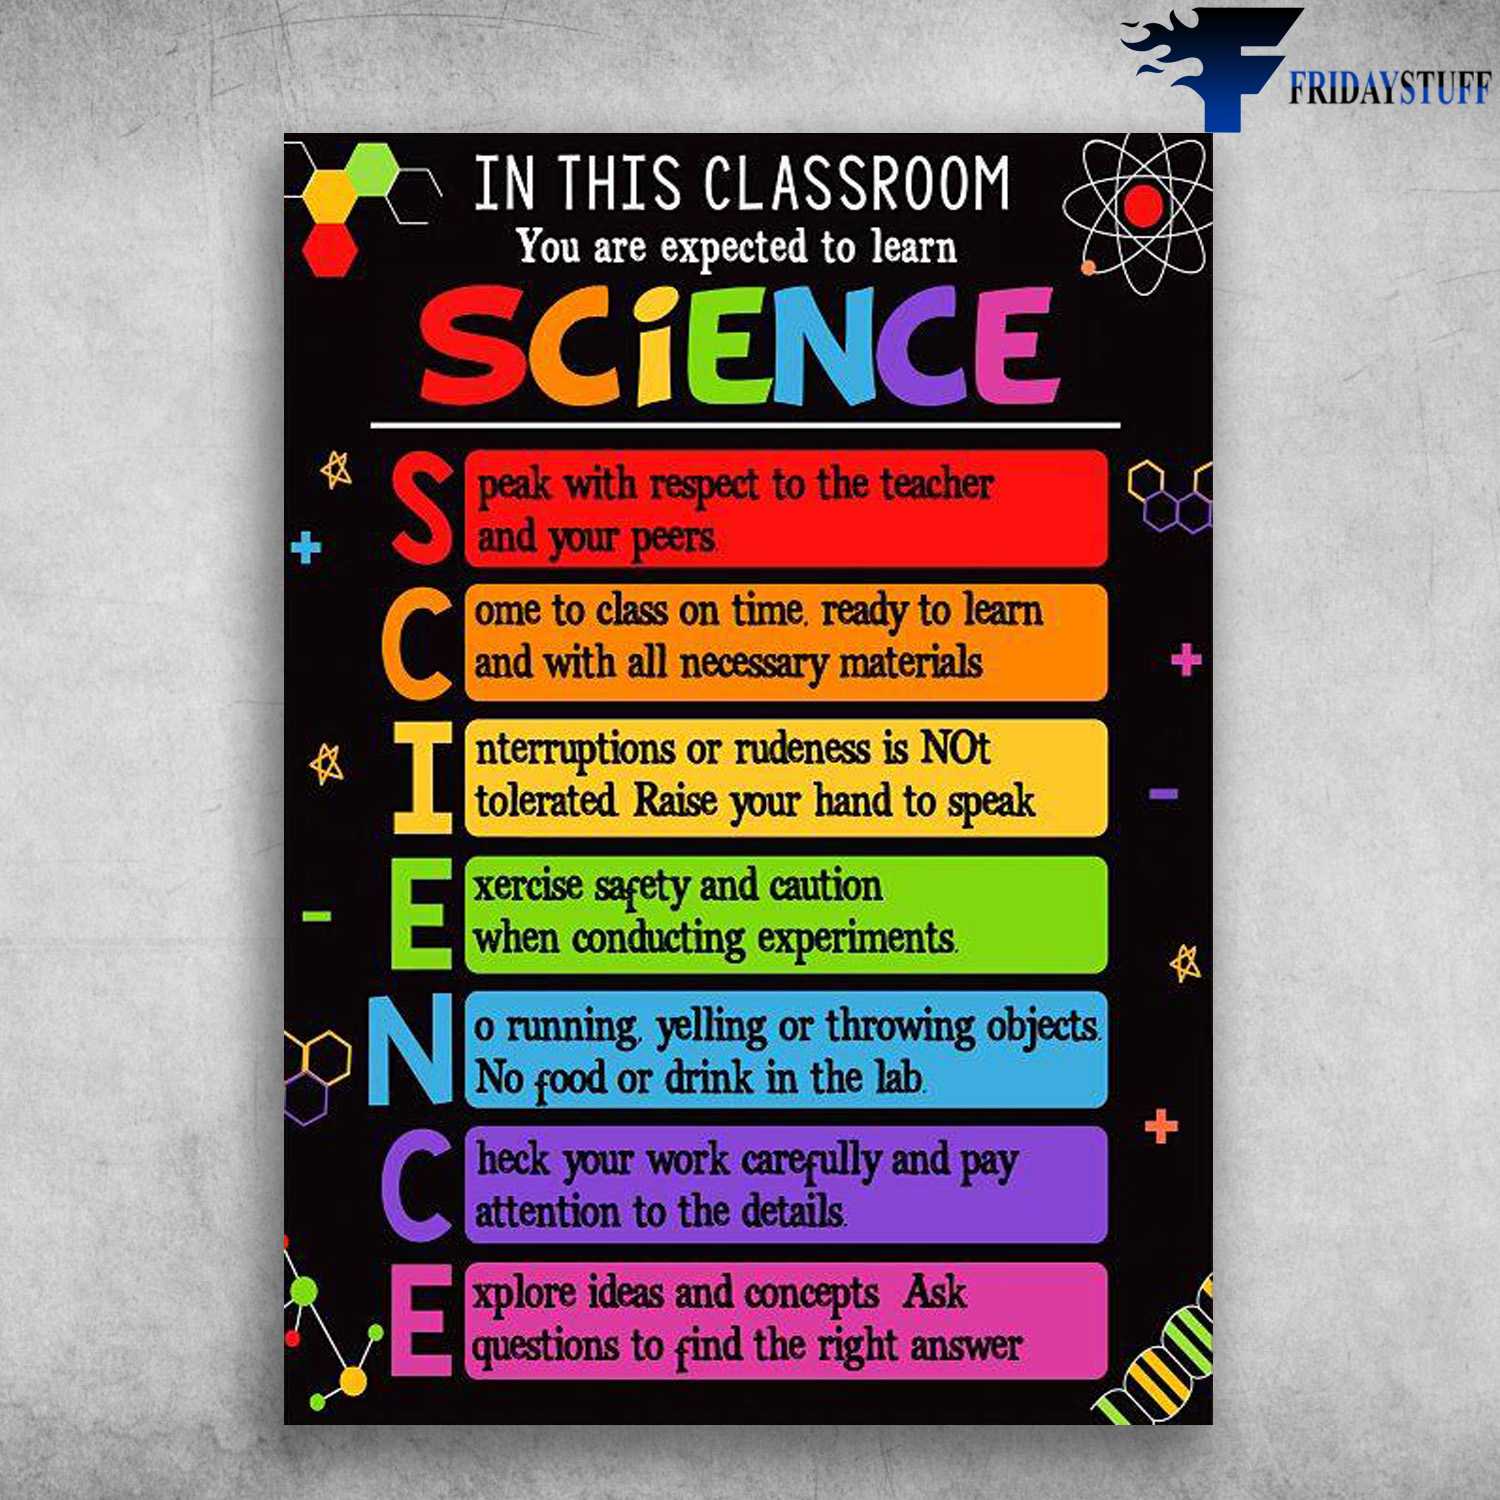 Back To School - In This Classroom, You Are Expected Learn Science, Speak With Respect To The Teacher And Your Peers, Come To Class On Time, Ready To Learn And With All Necessary Materials